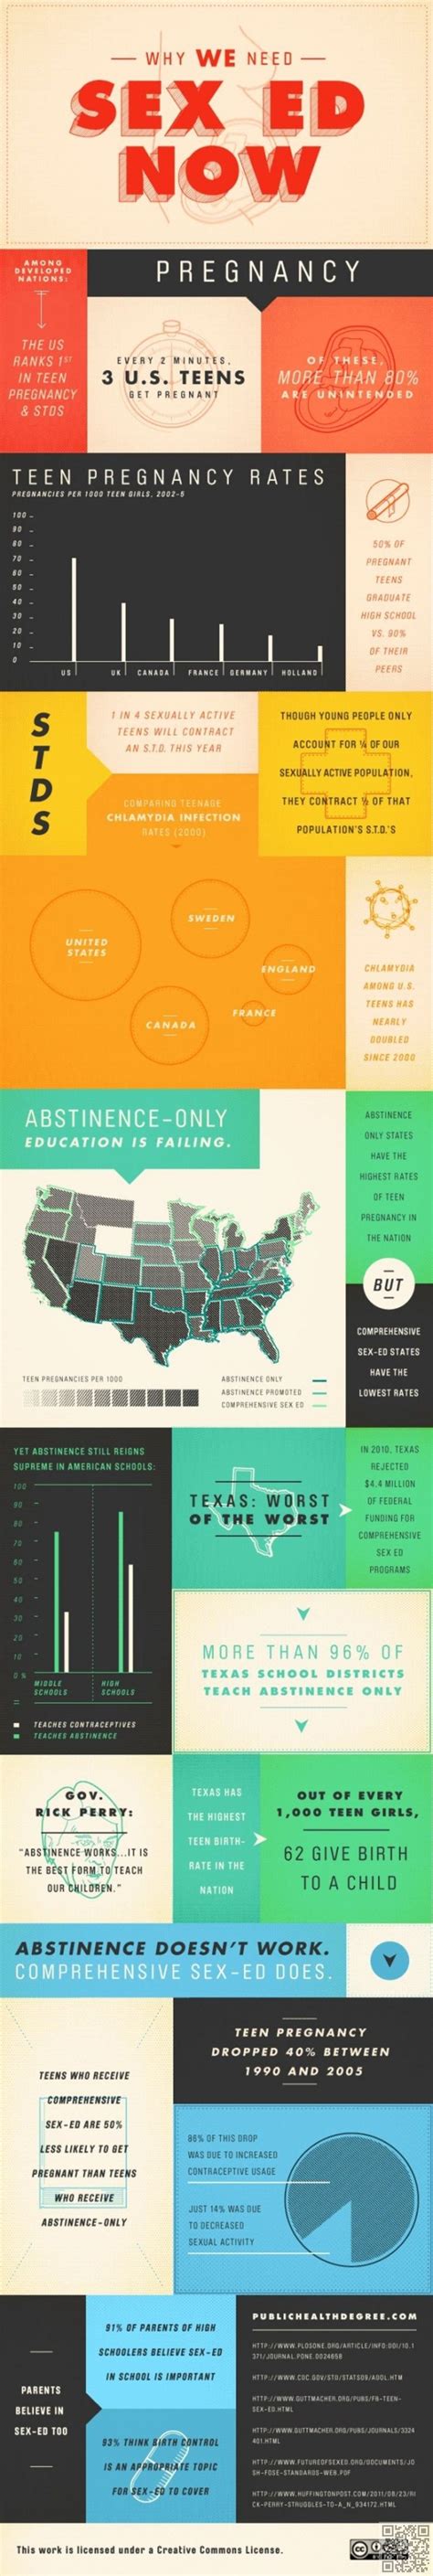 24 Best Teen Pregnancy Prevention Images On Pinterest Infographic